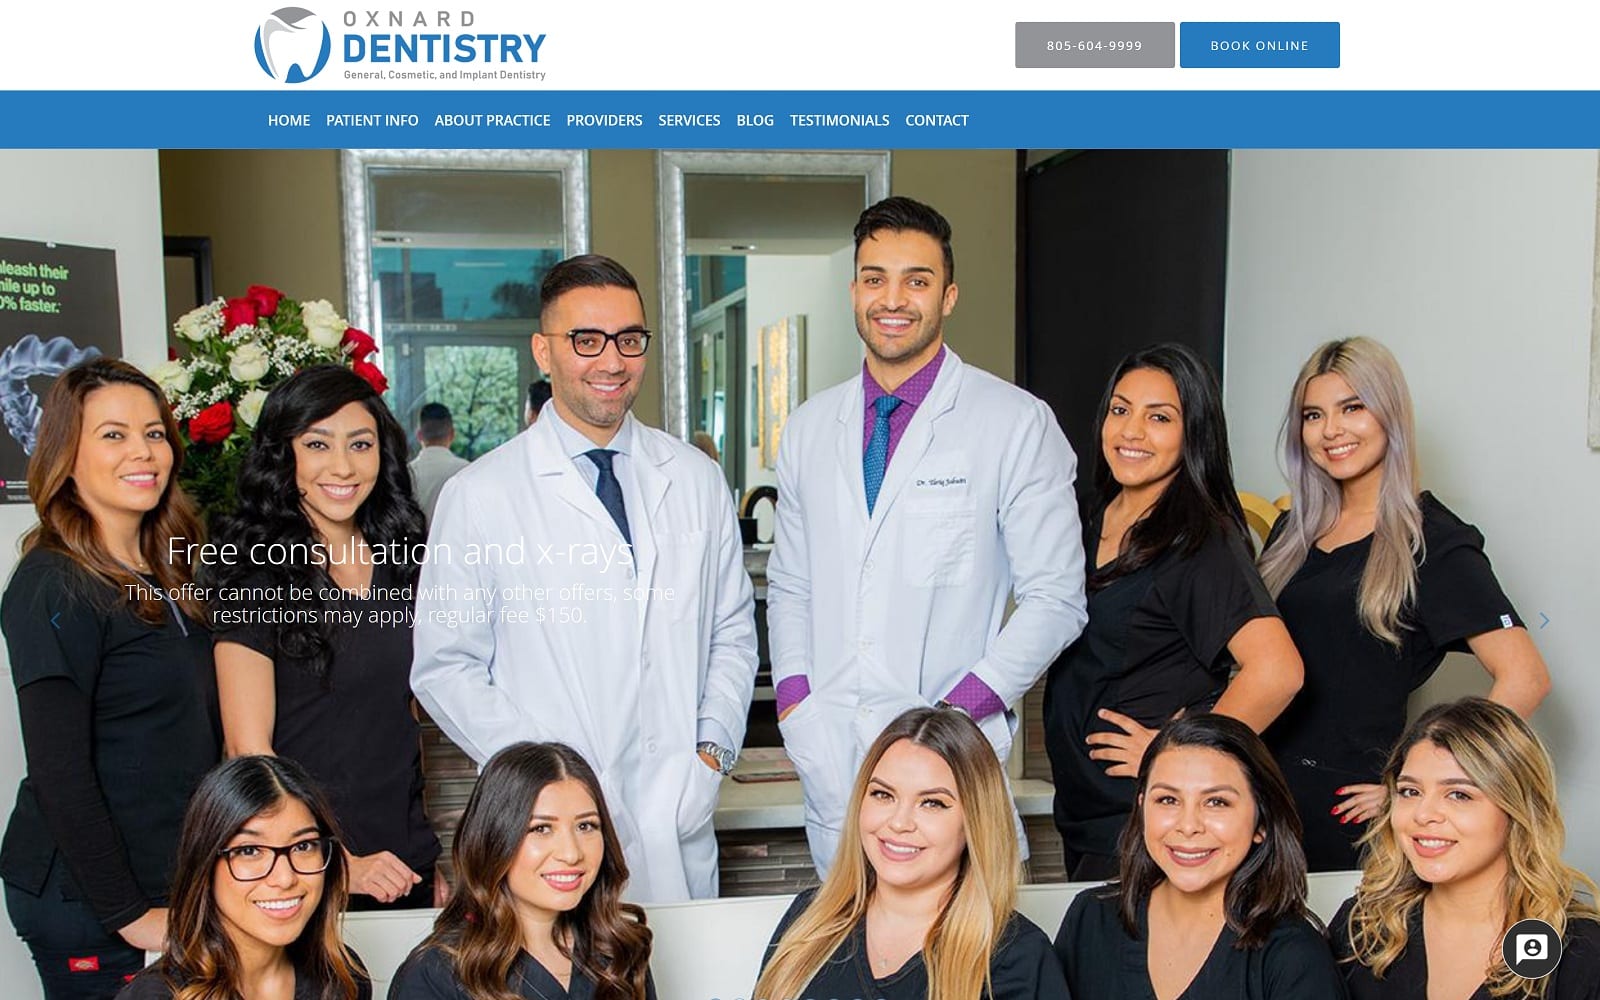 Top 5 Cosmetic Dentists In Oxnard CA | Dental Country™